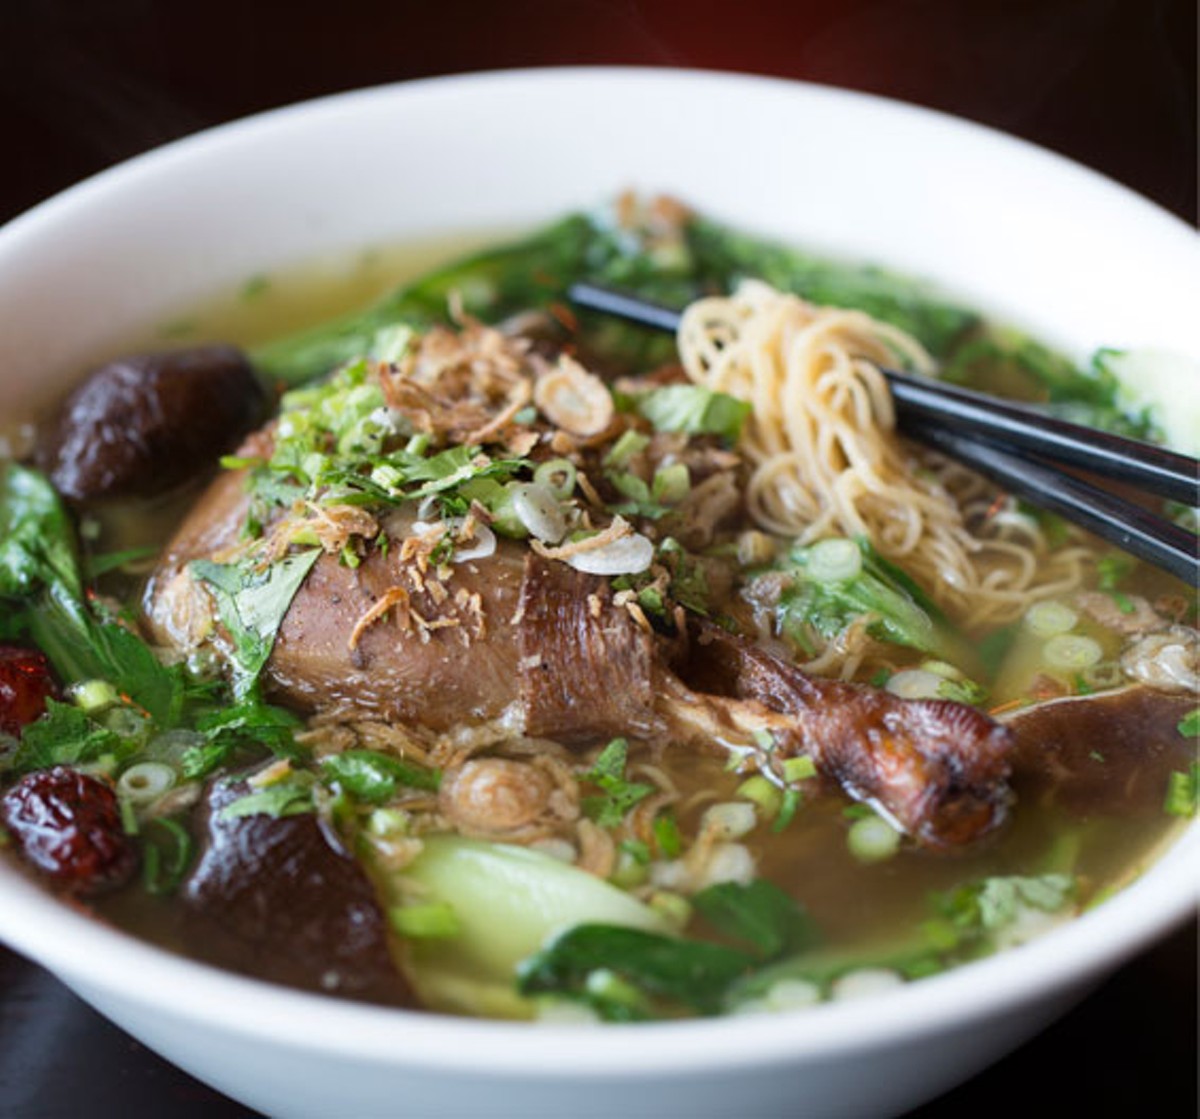 Mi vit tiem, the five-herbs duck soup, is slow cooked, served over egg noodles and baby bok choy. See also: Inside Mi Linh in Rock Hill